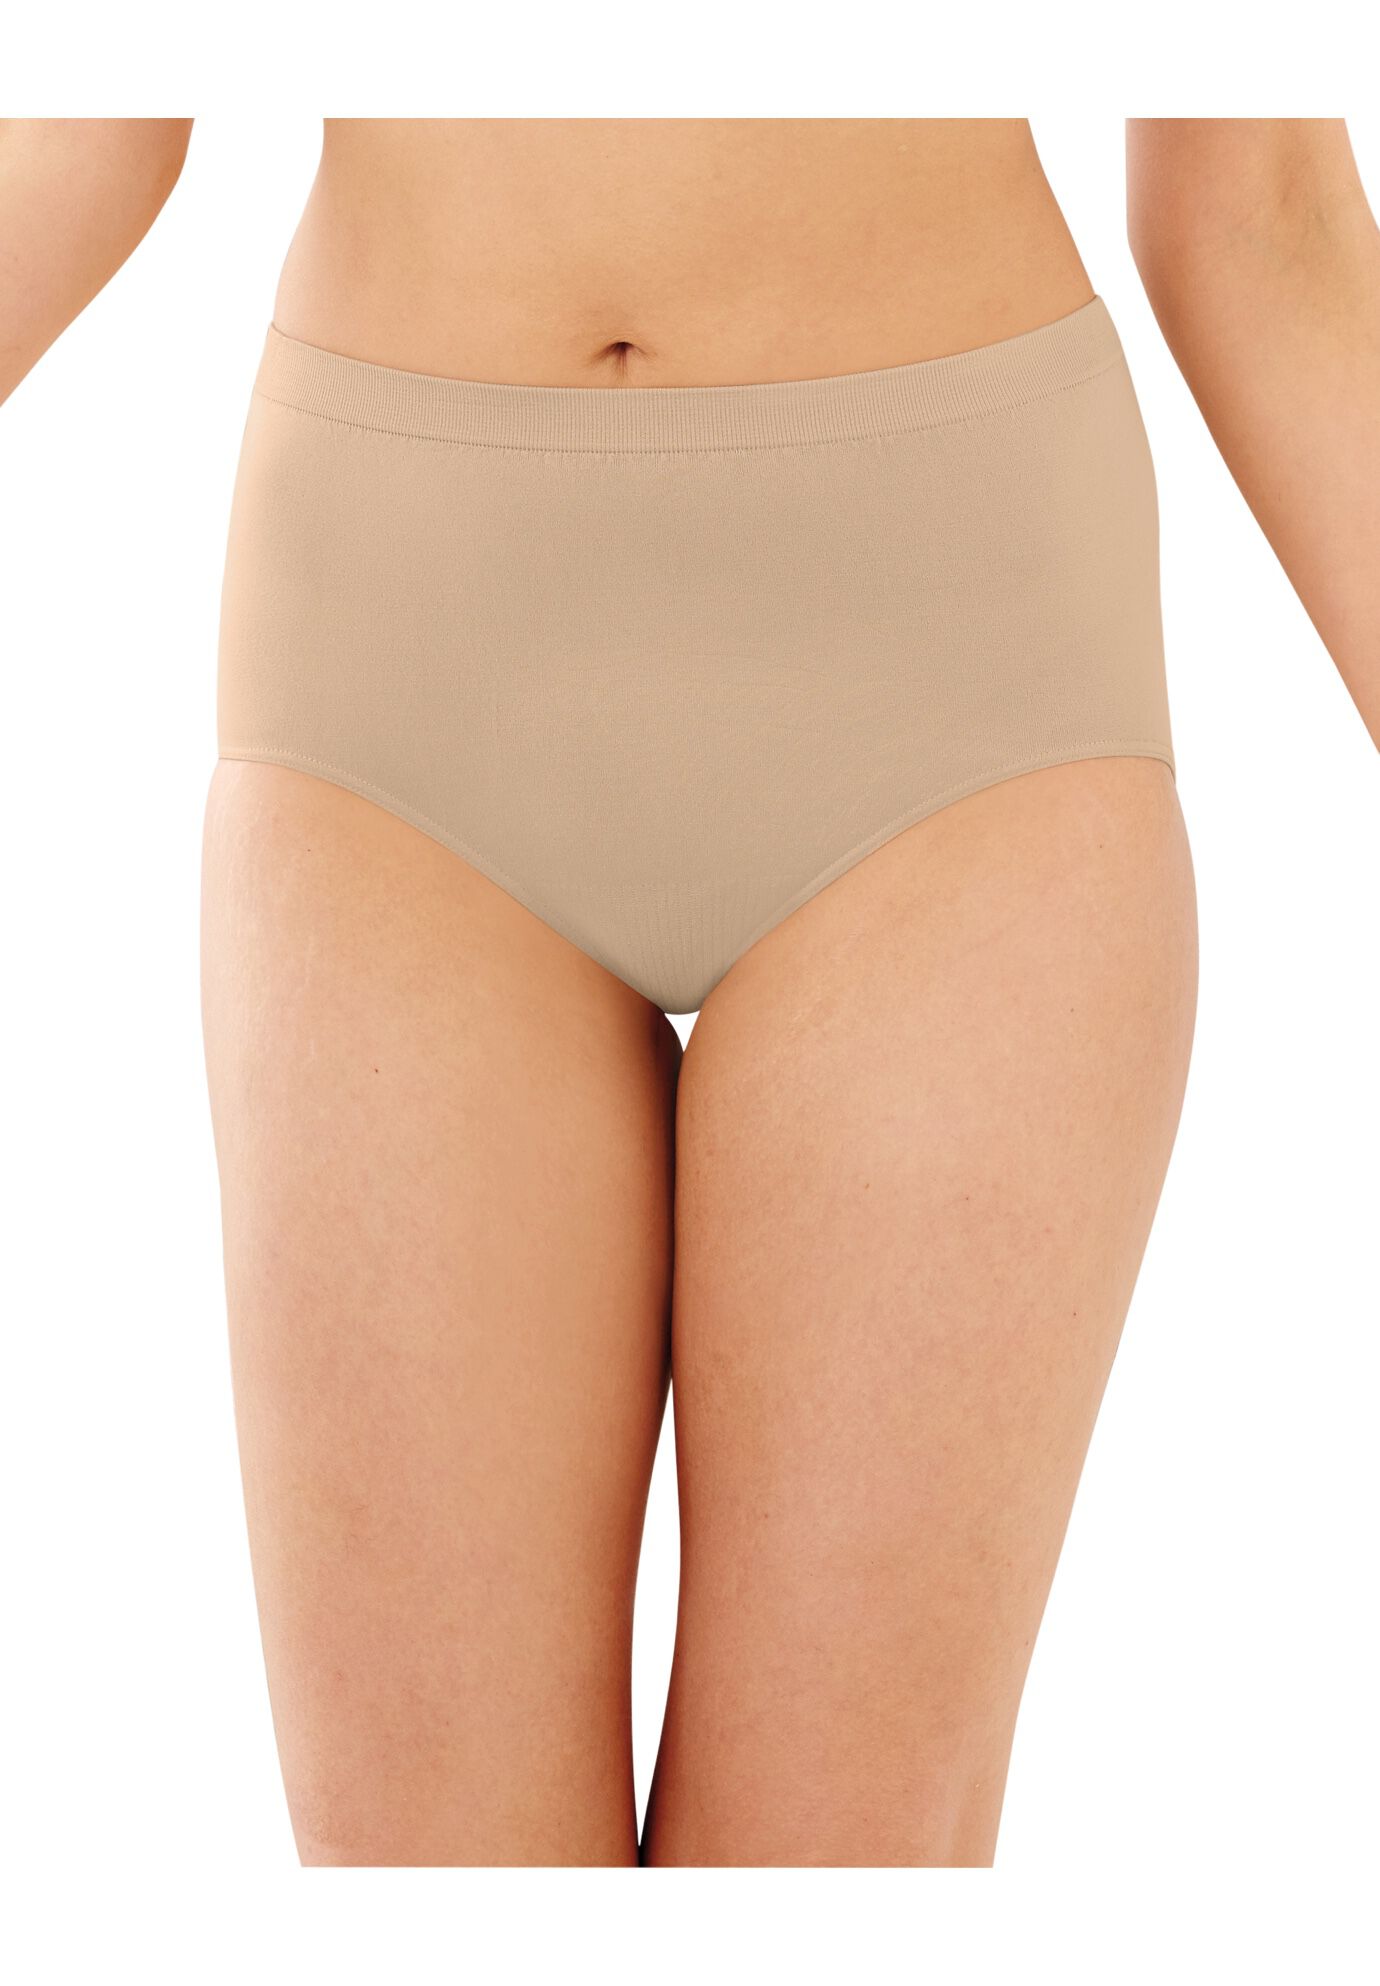 Plus Size Women's Comfort Revolution Brief by Bali in Nude (Size 11)